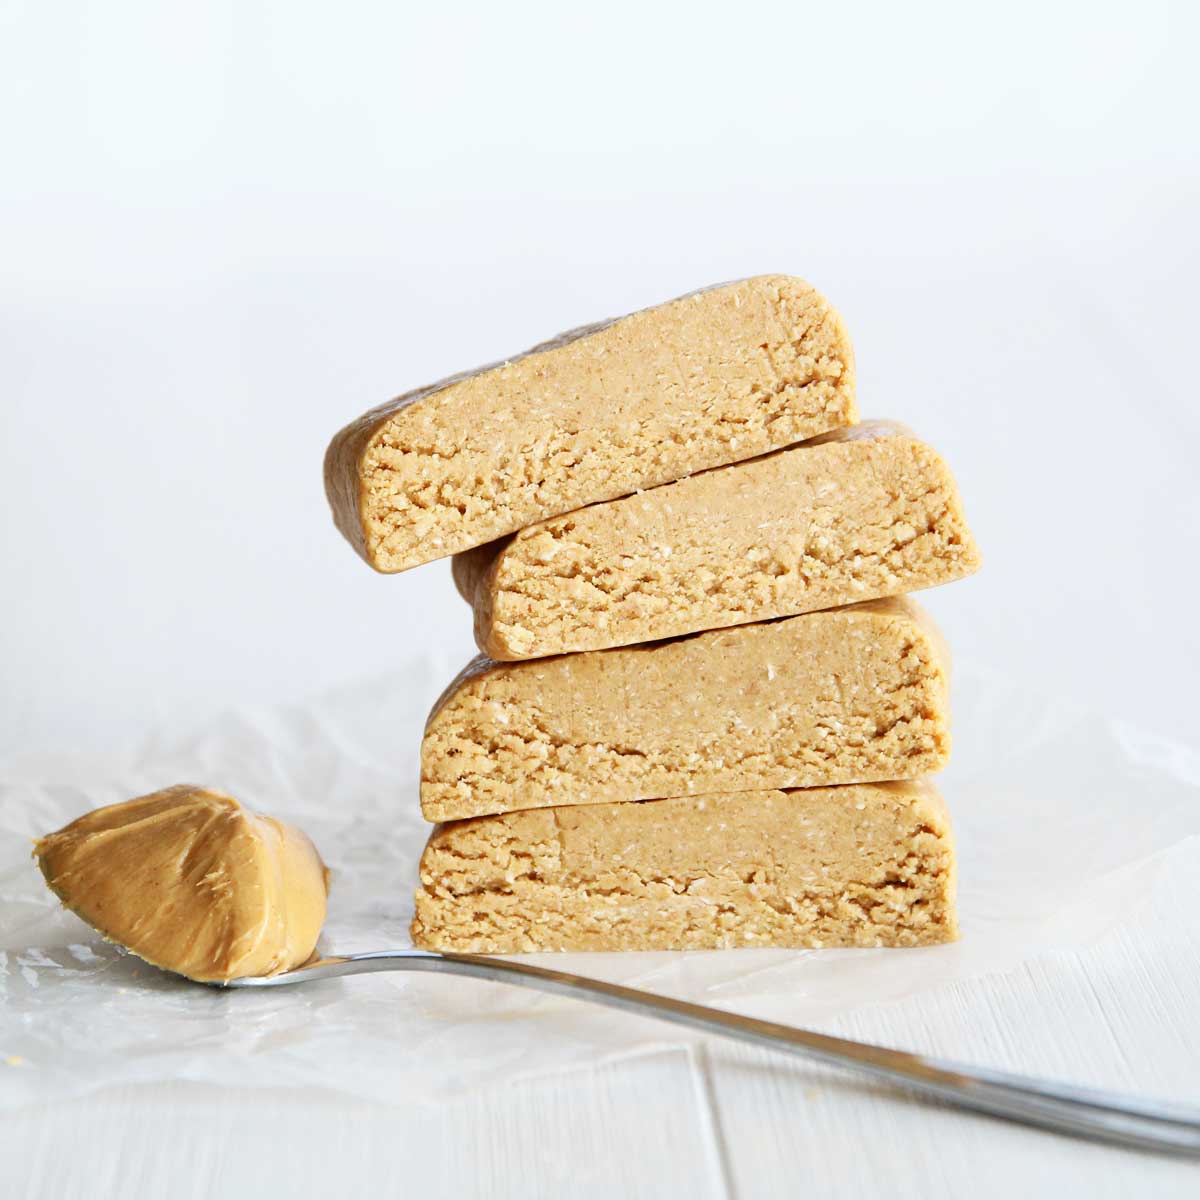 4-Ingredient Peanut Butter Oatmeal Protein Bars (Healthy, GF and Vegan) - Zero-Sugar Whipped Cream